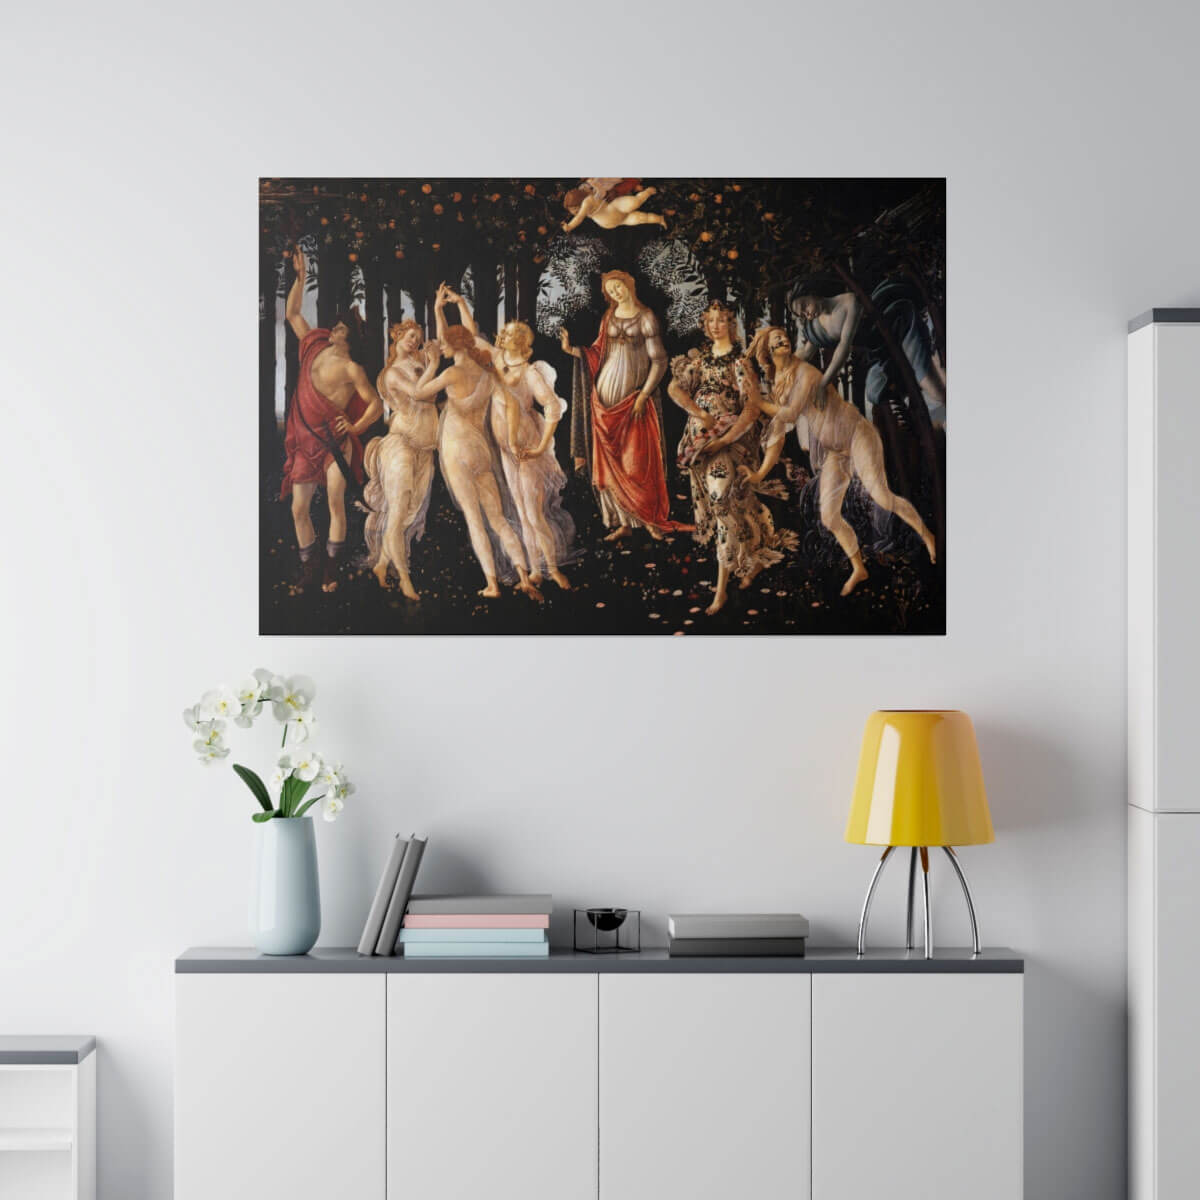 Printed on high-quality canvas for durability and vibrant colors